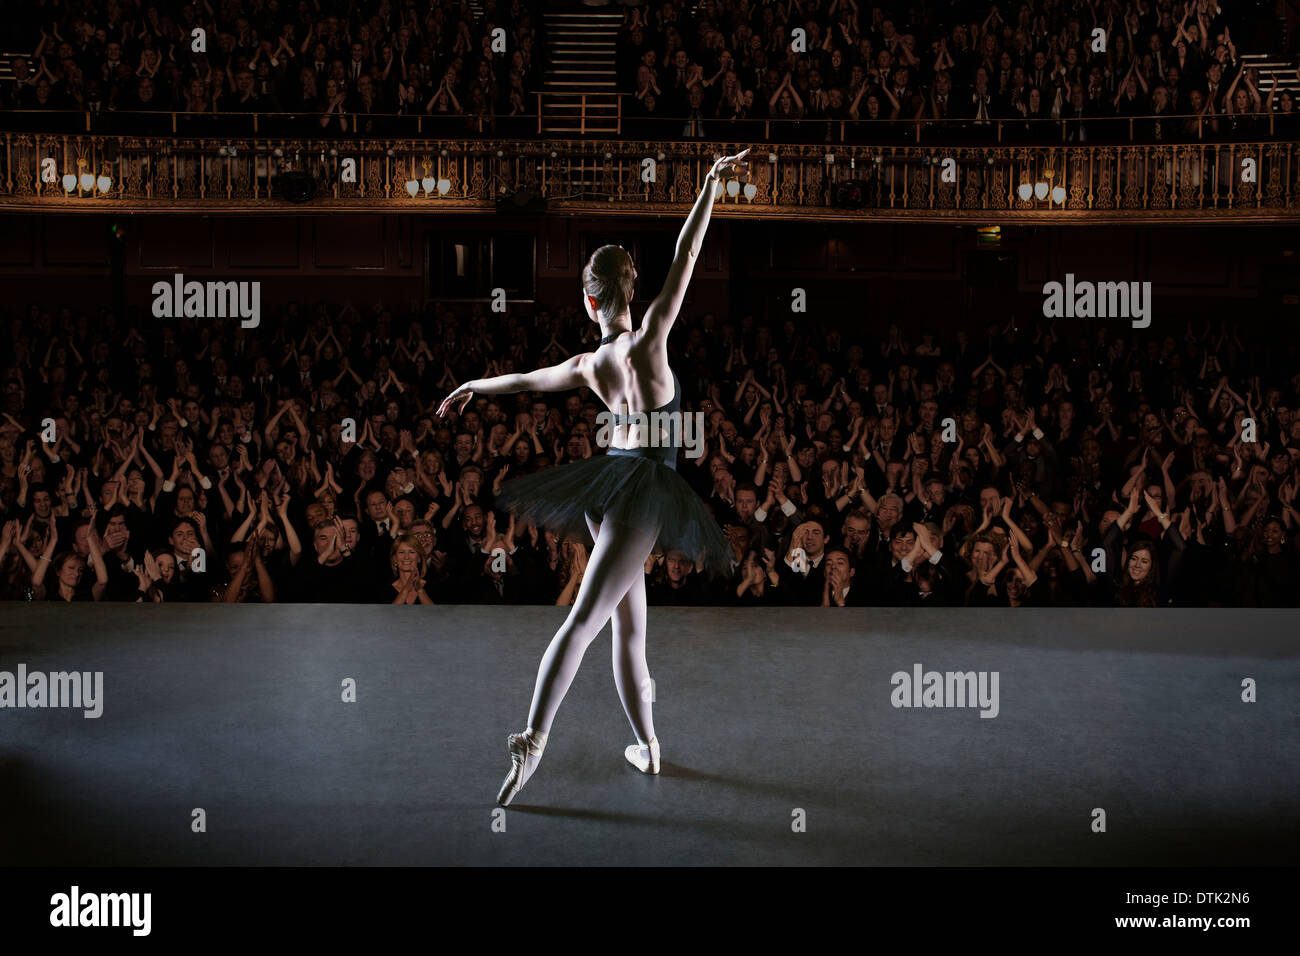 Ballerine performing on stage in theater Banque D'Images